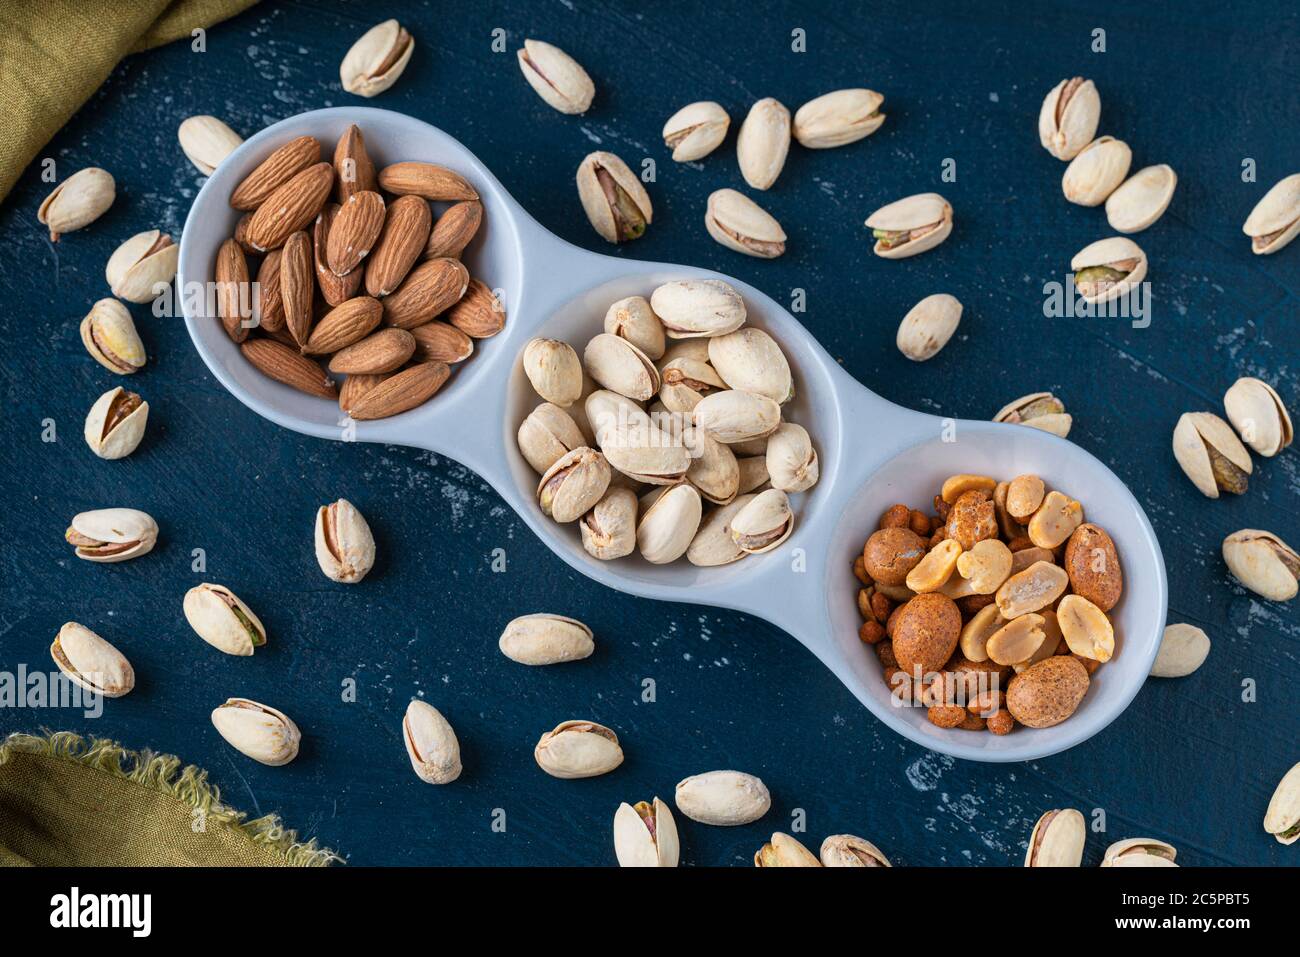 Roasted Nuts And Salted Pistachios In White Ceramic Bowl Stock Photo